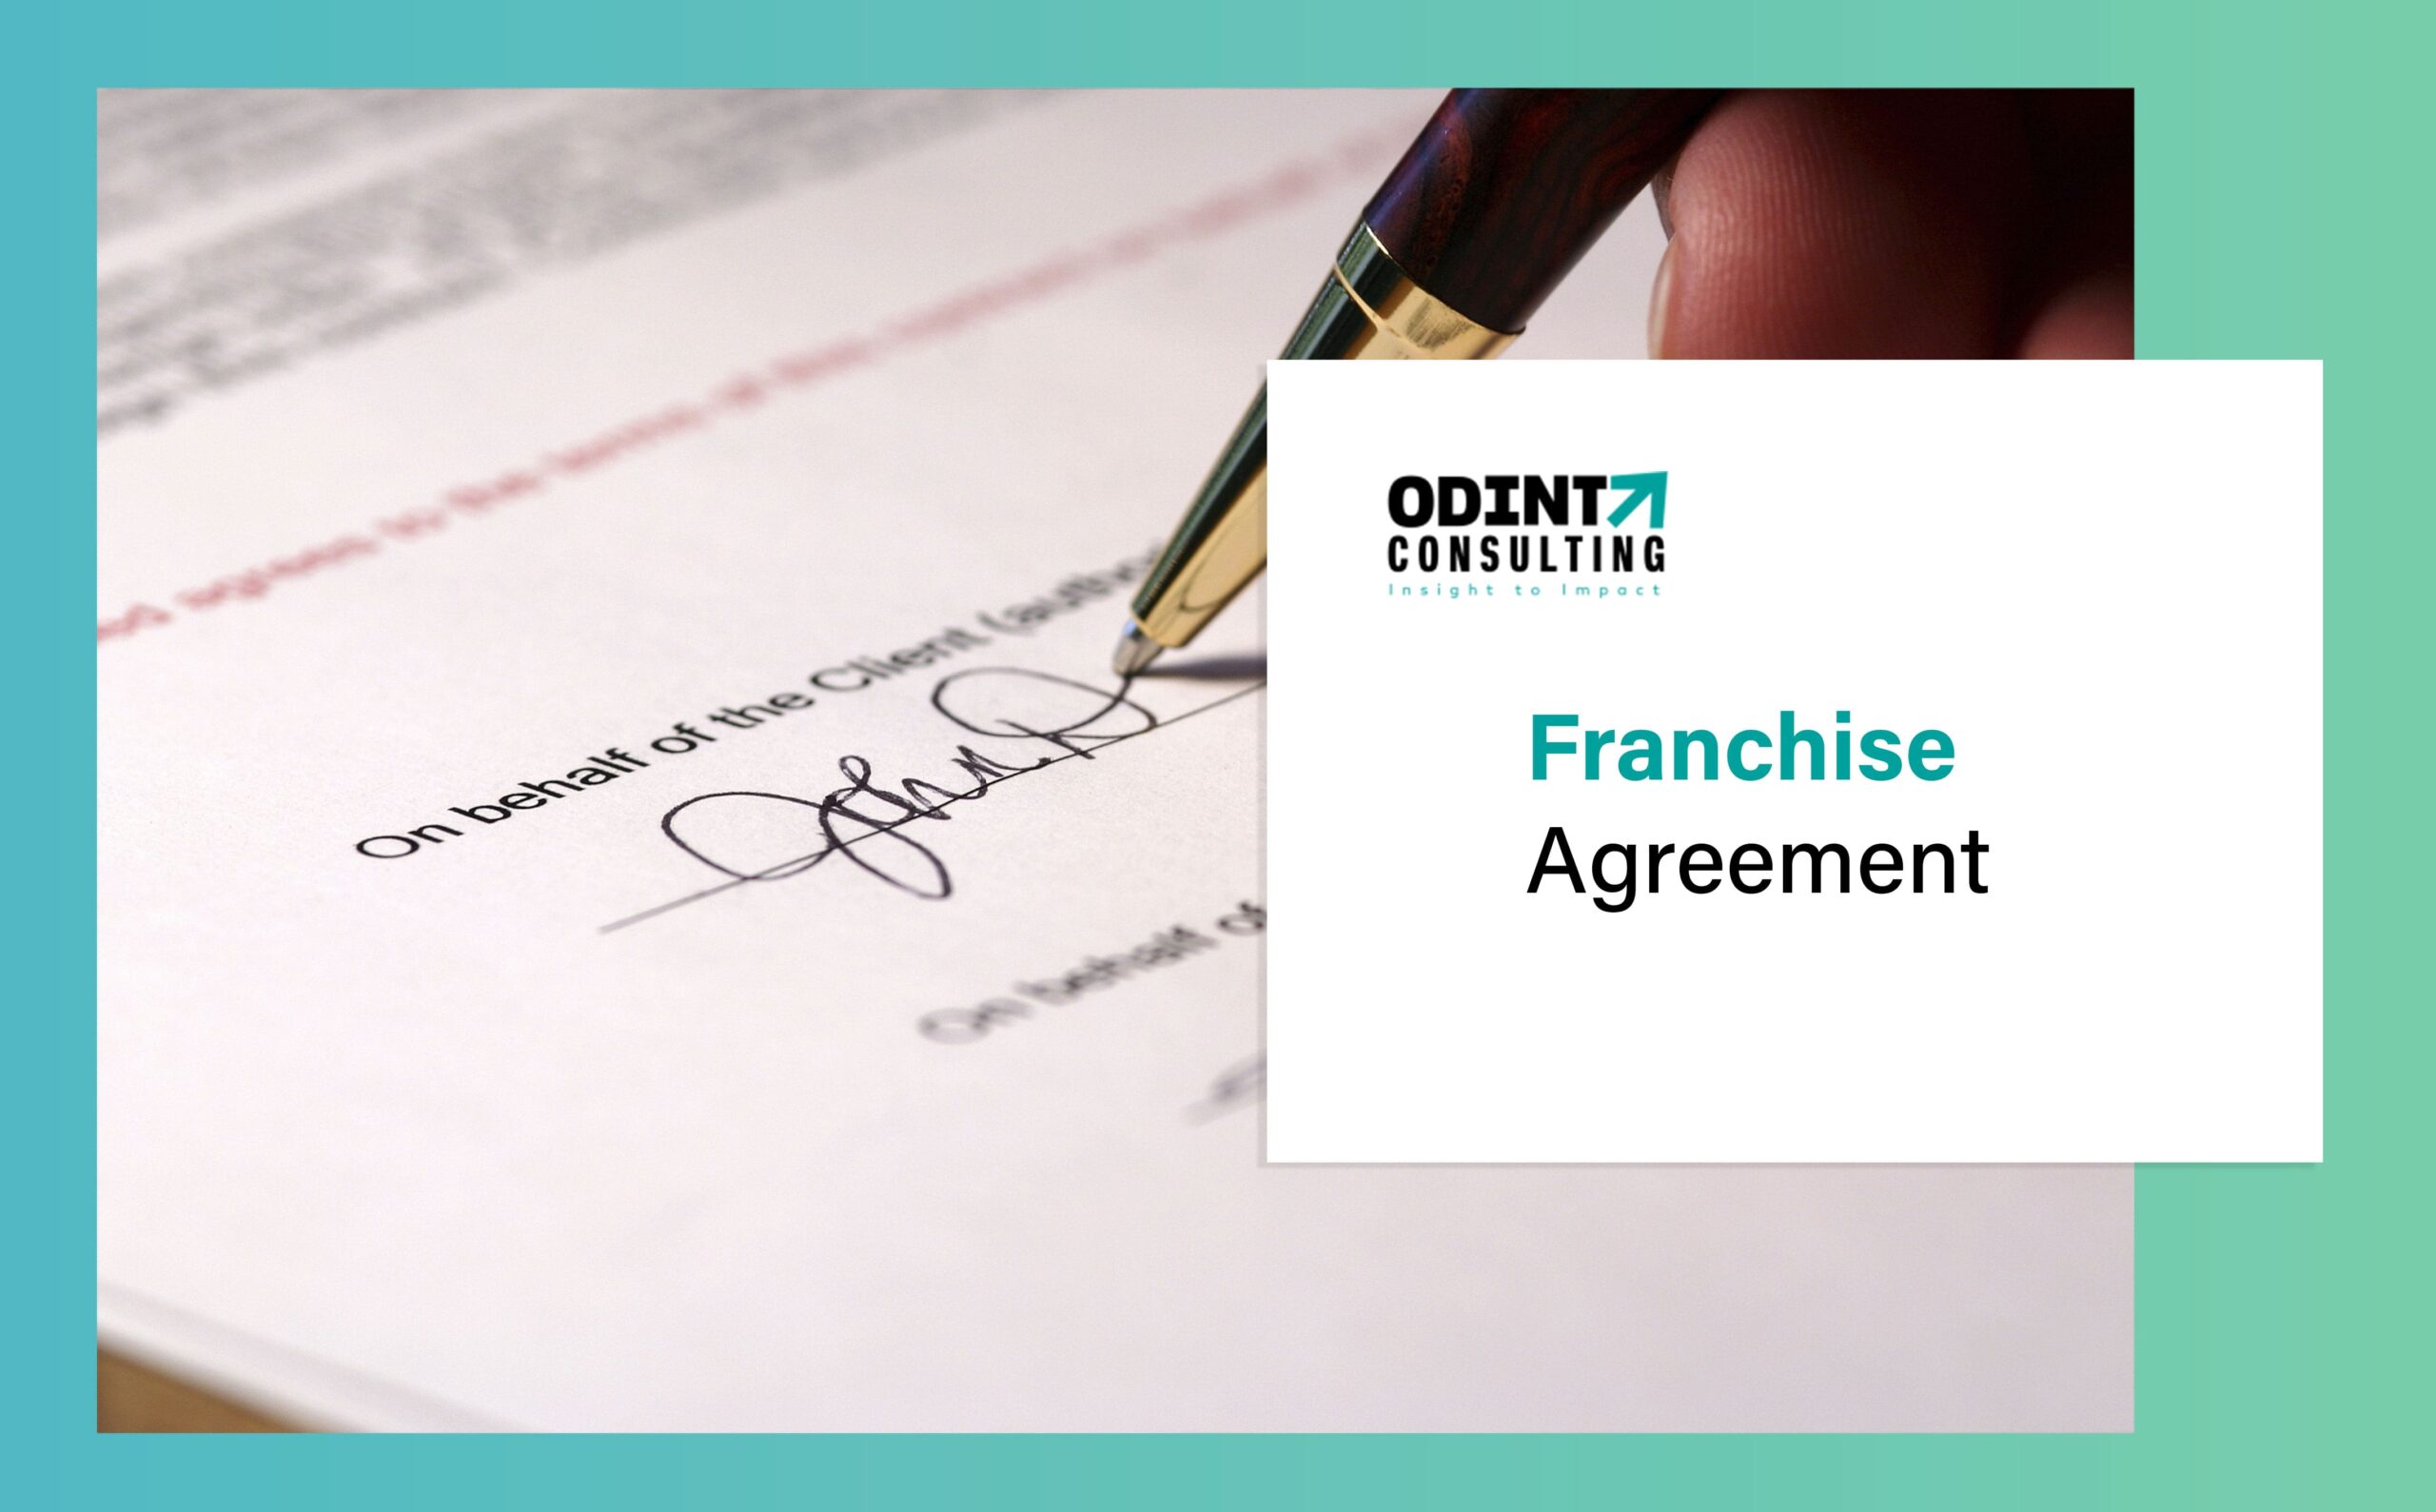 Franchise Agreement: Definition, Advantages & Things to Include